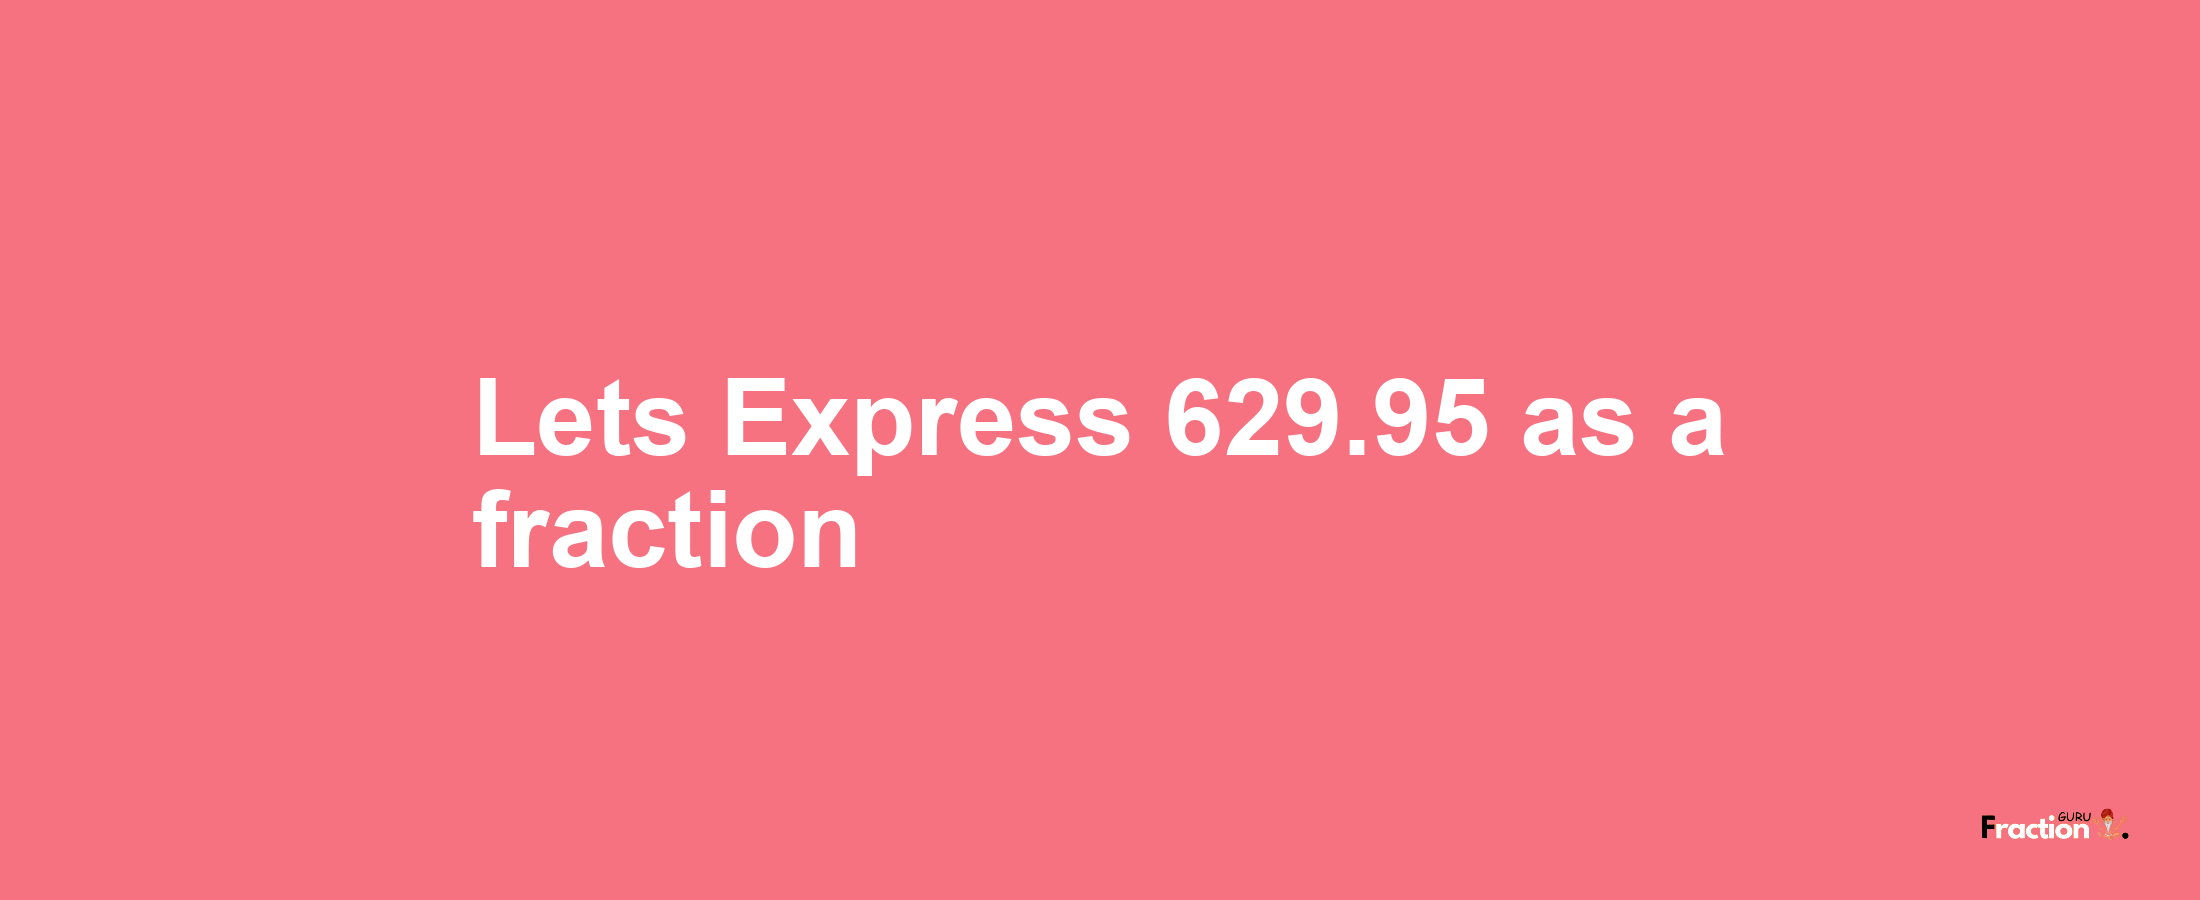 Lets Express 629.95 as afraction